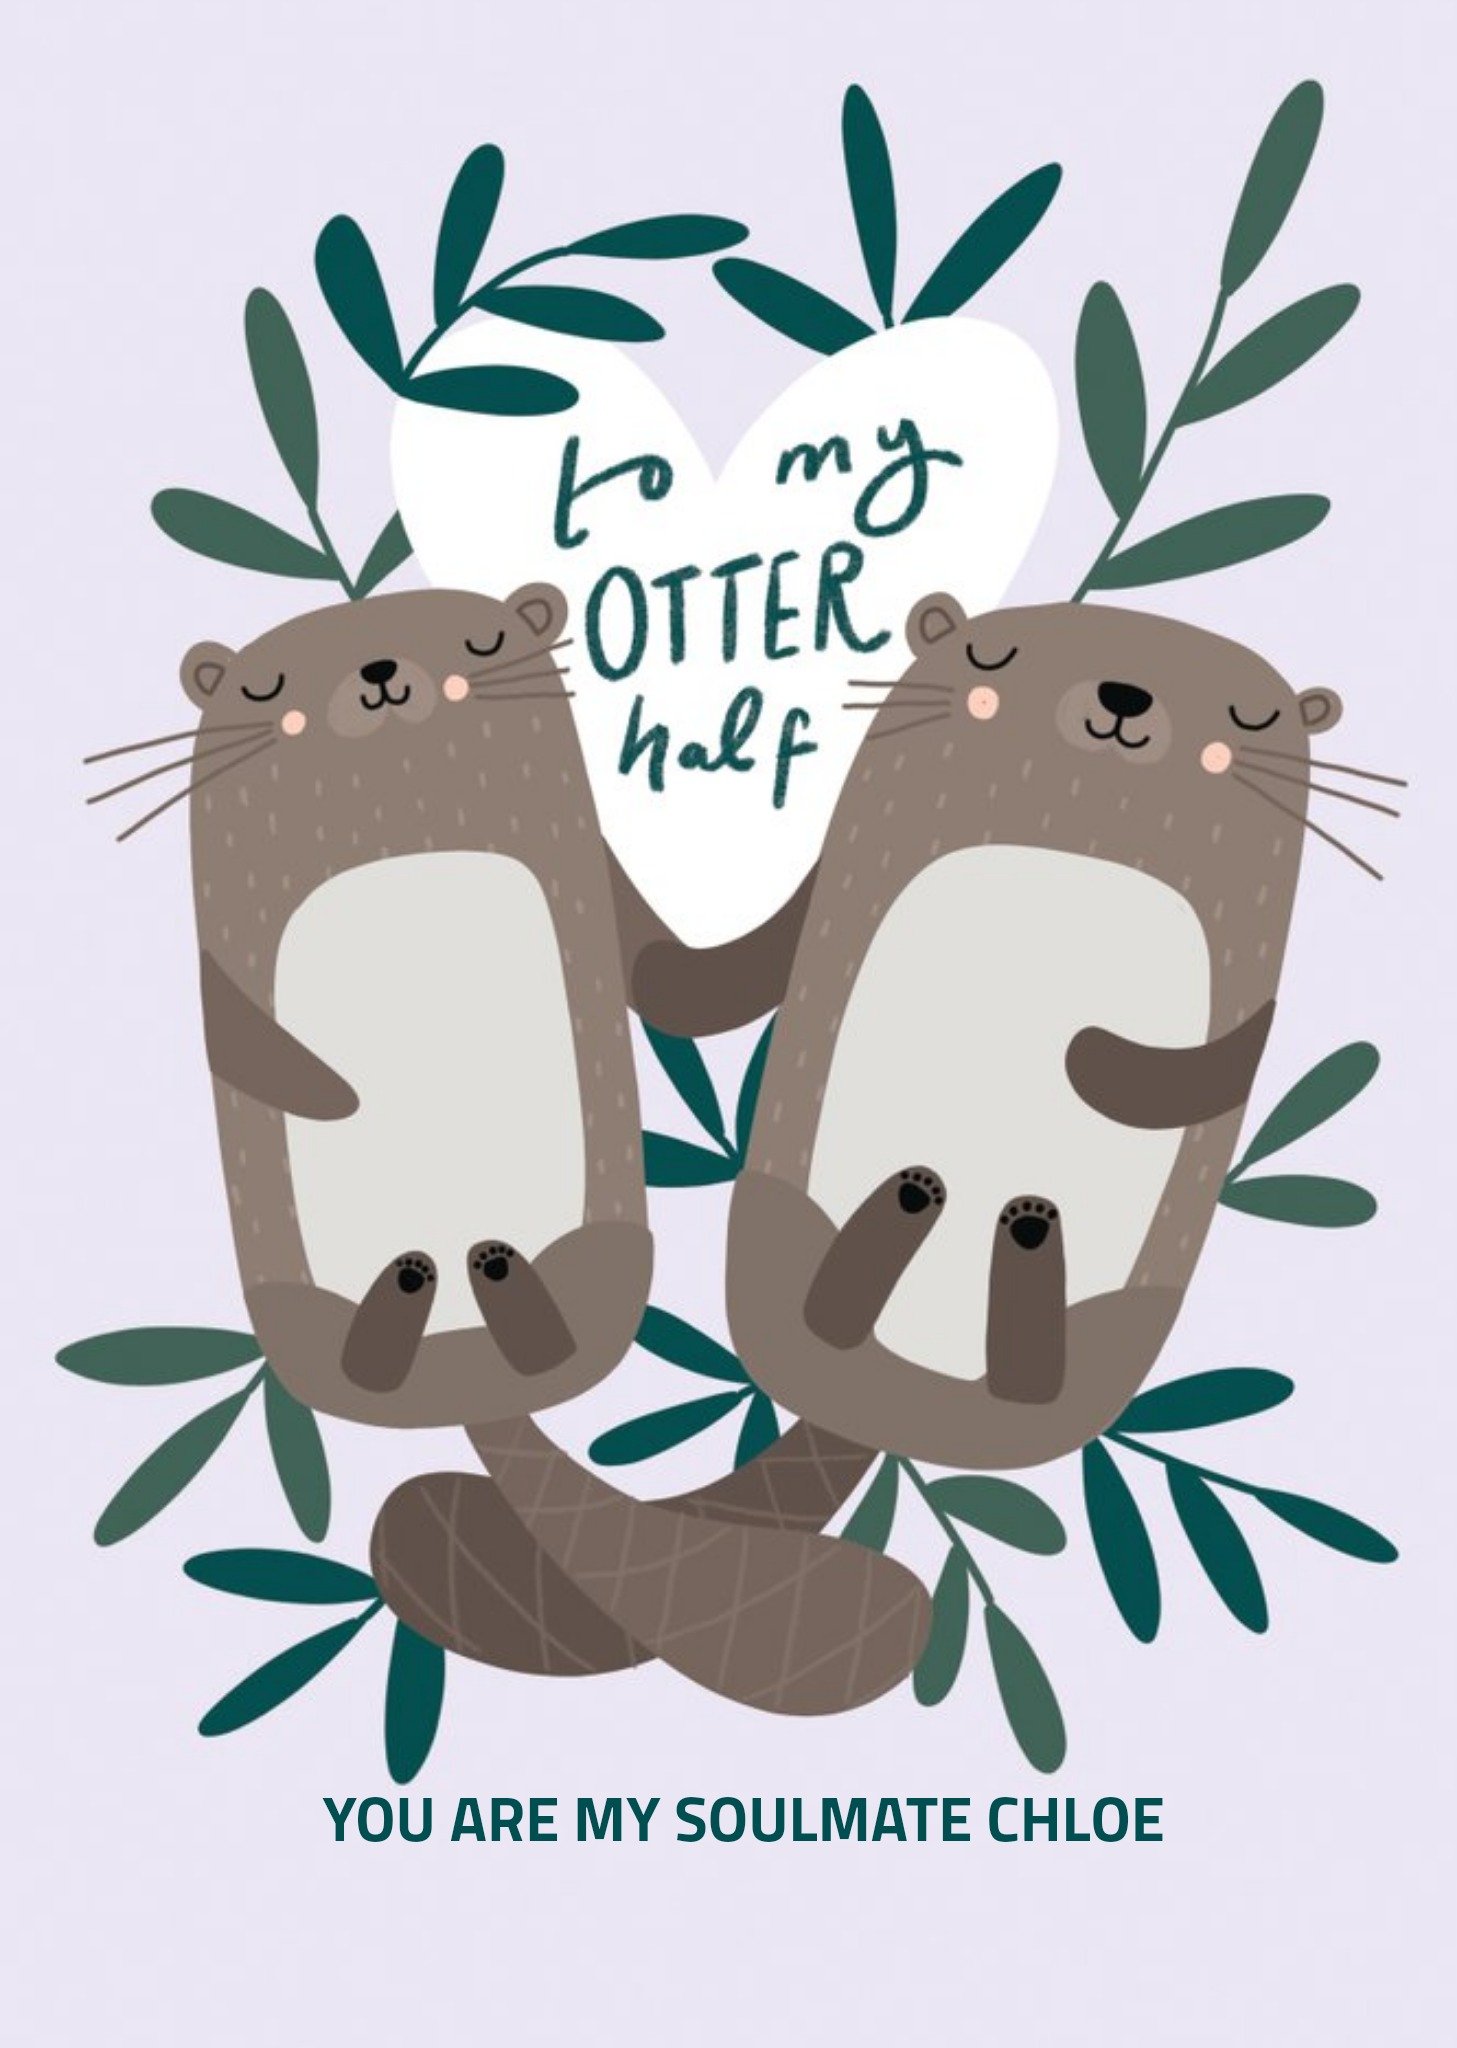 Moonpig To My Otter Half Cute Otter Illustration Card, Large